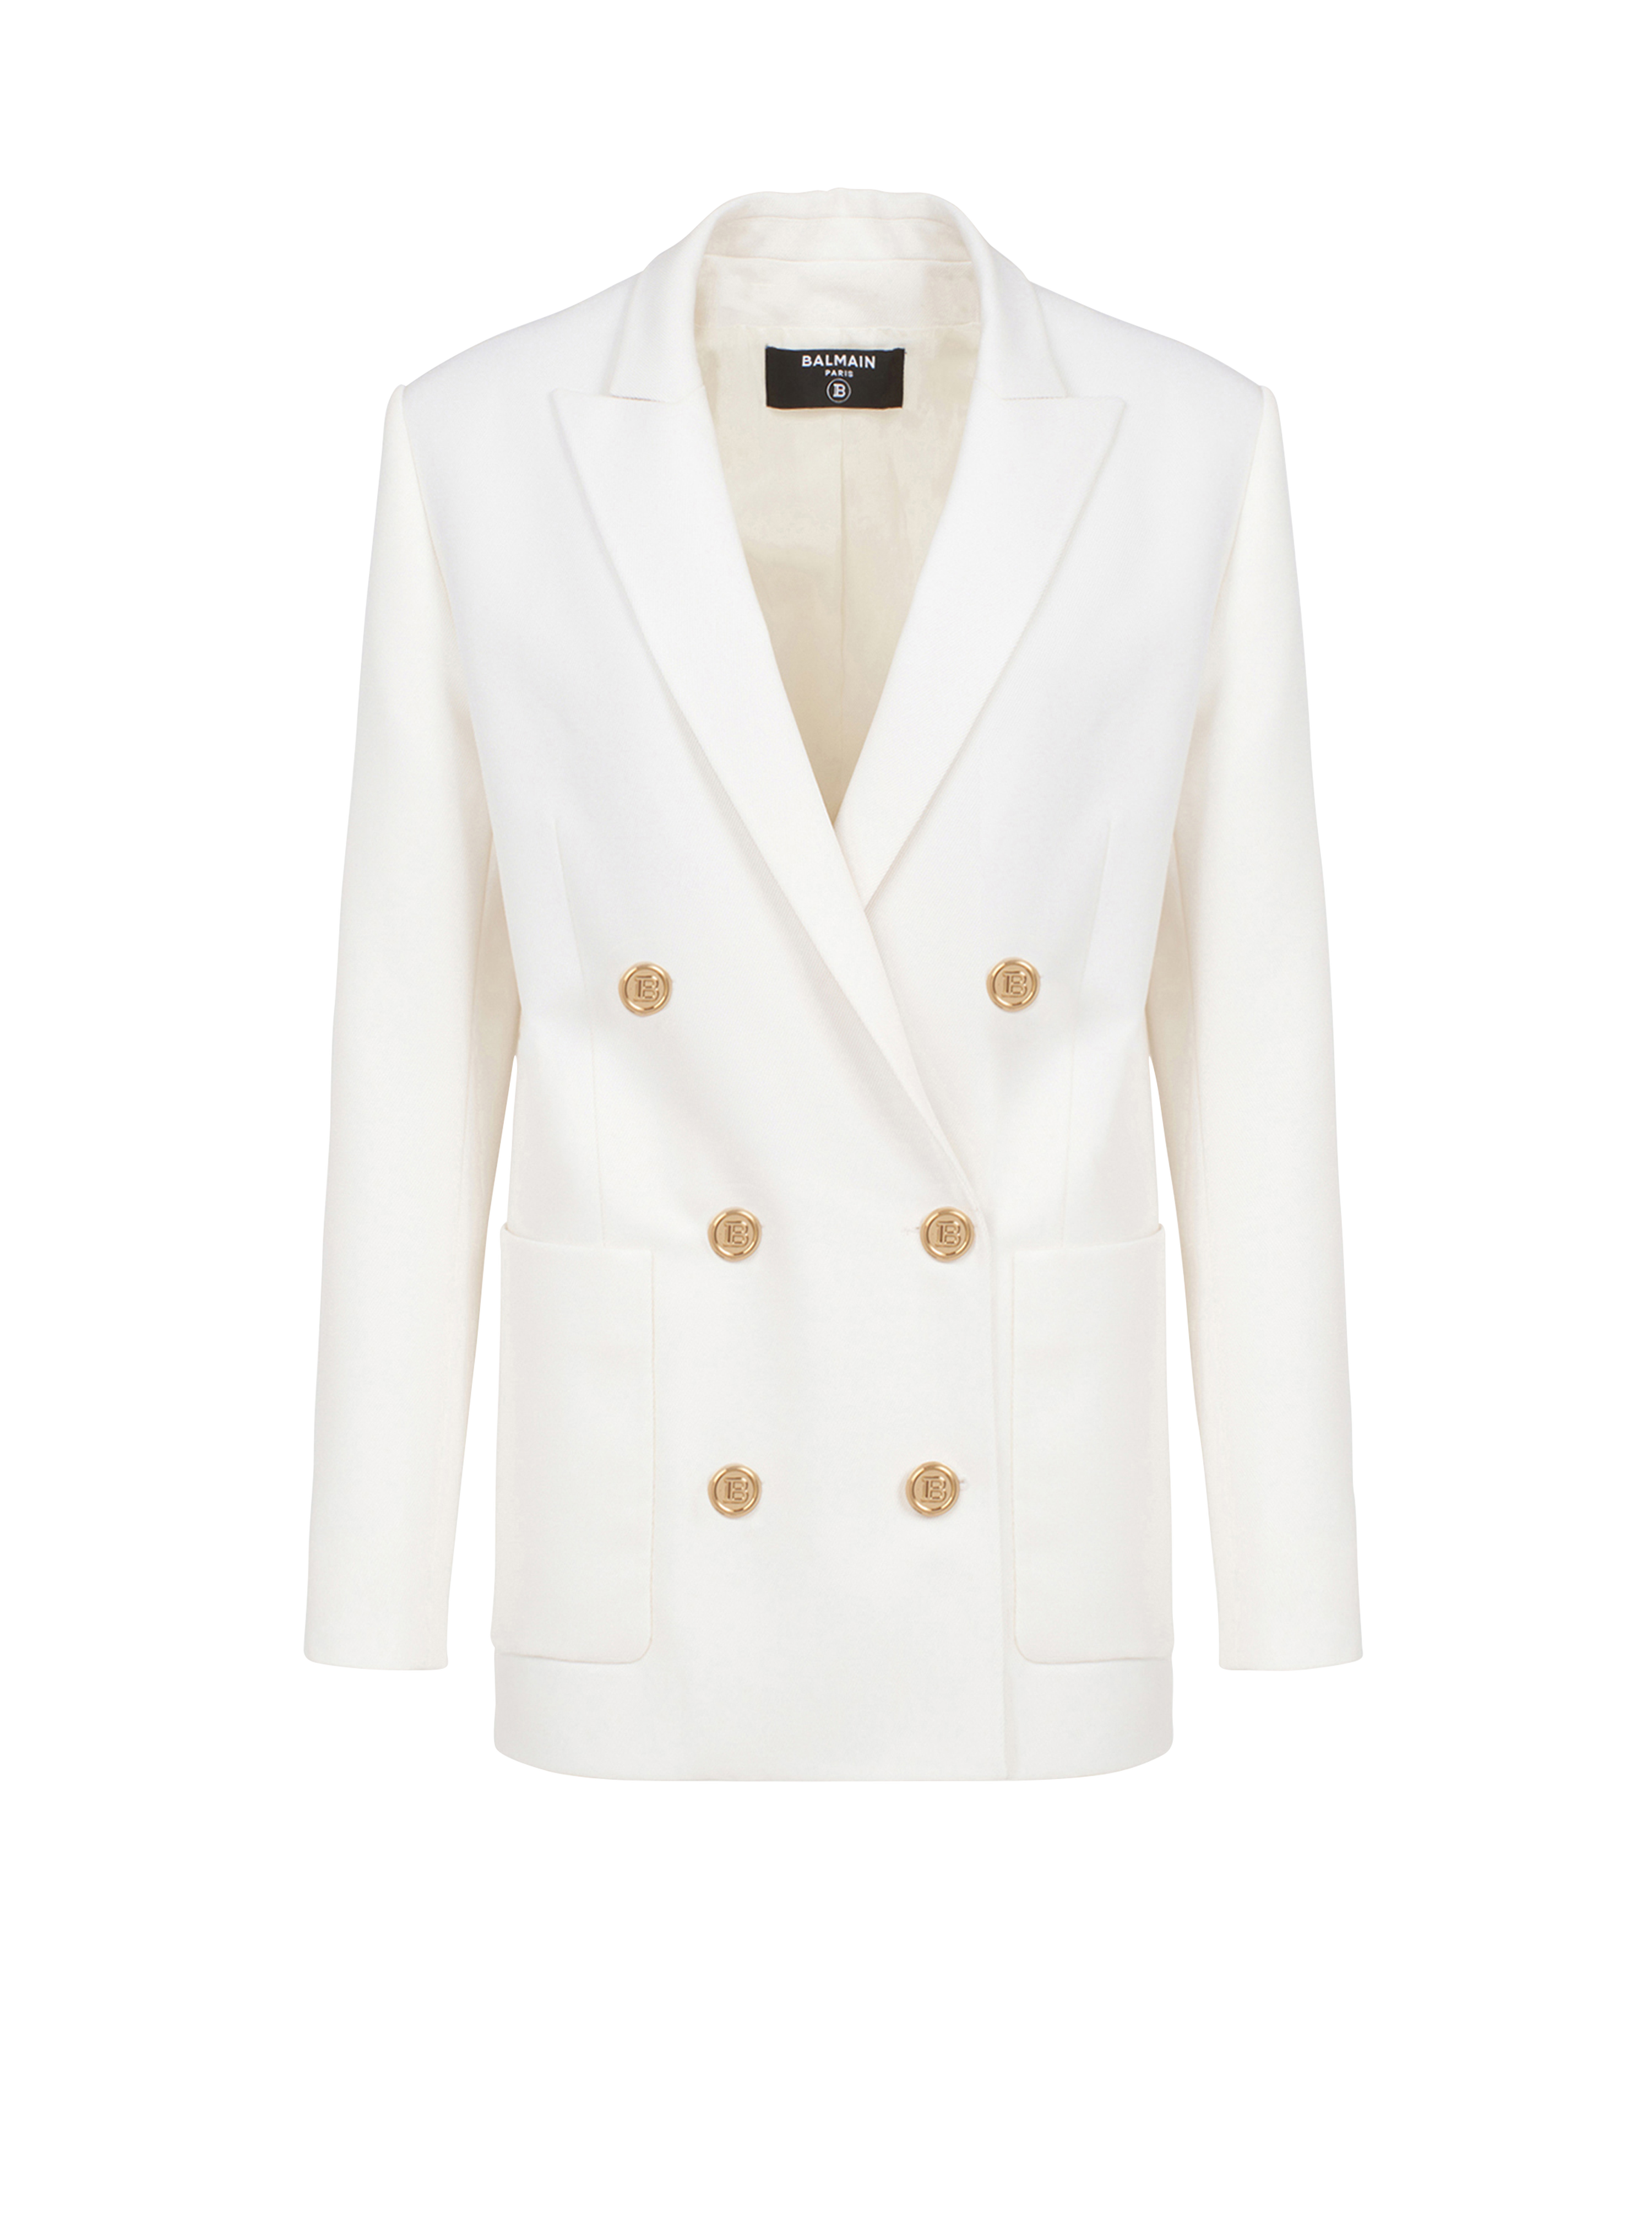 Wool double-breasted boyfriend jacket , white, hi-res